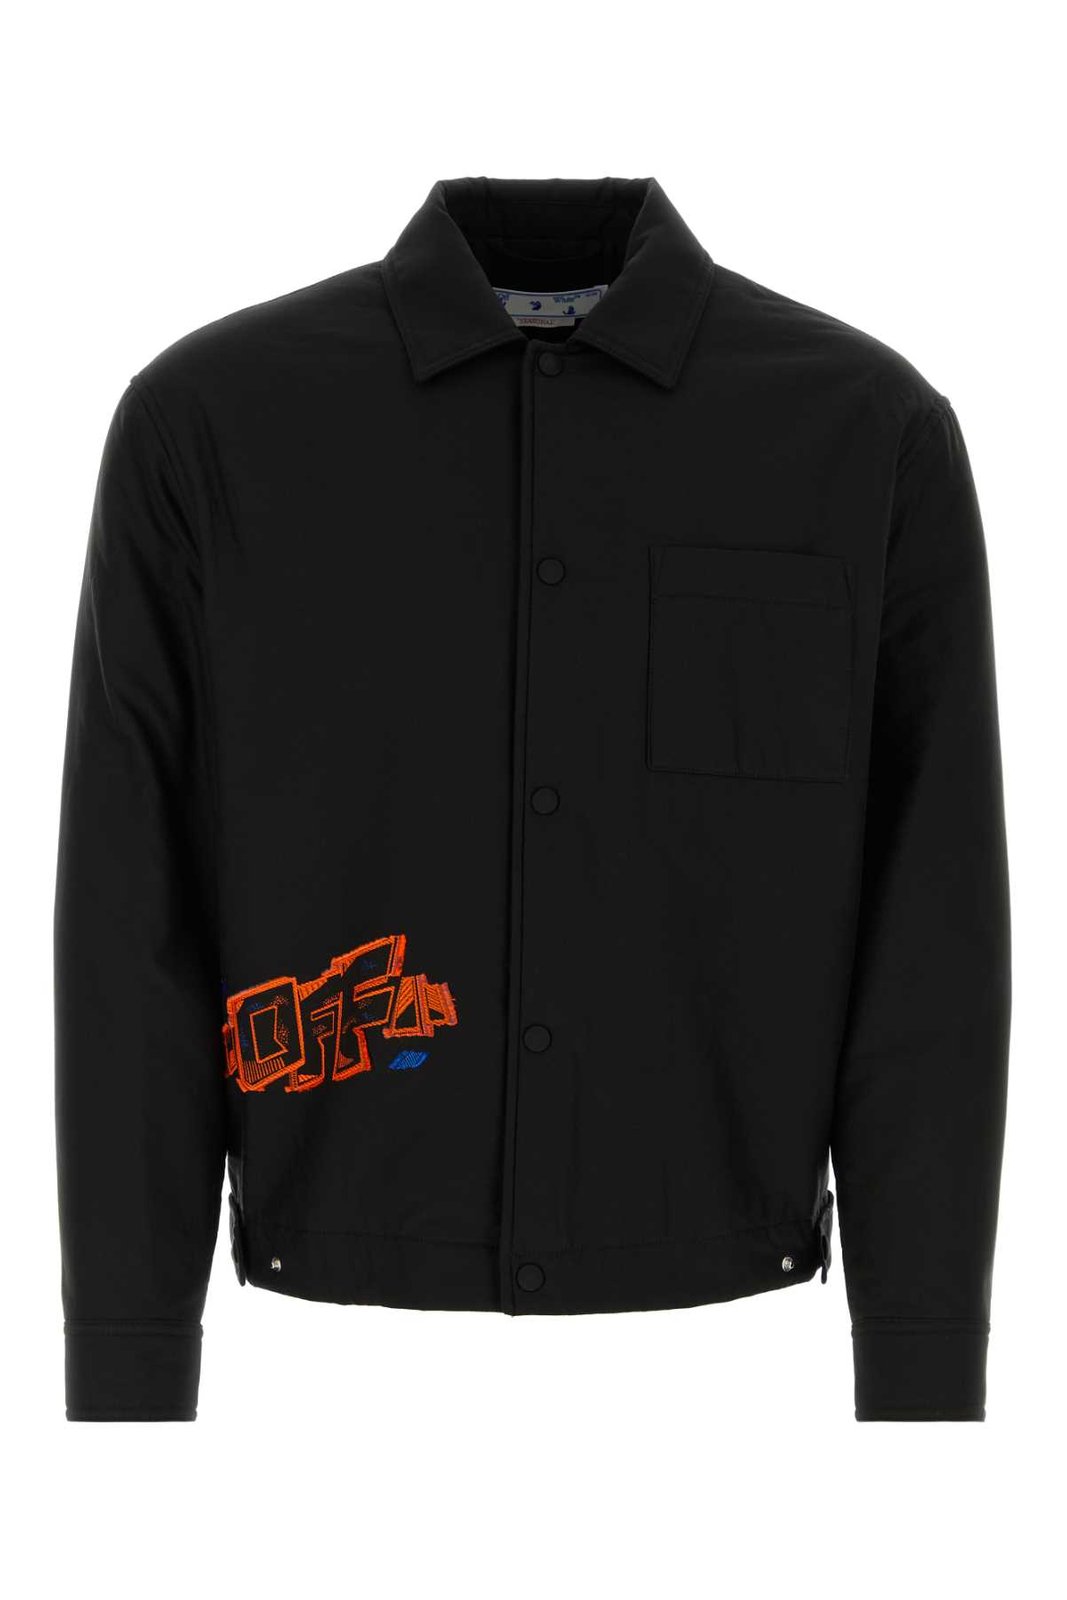 Off-White Buttoned Long-Sleeved Jacket